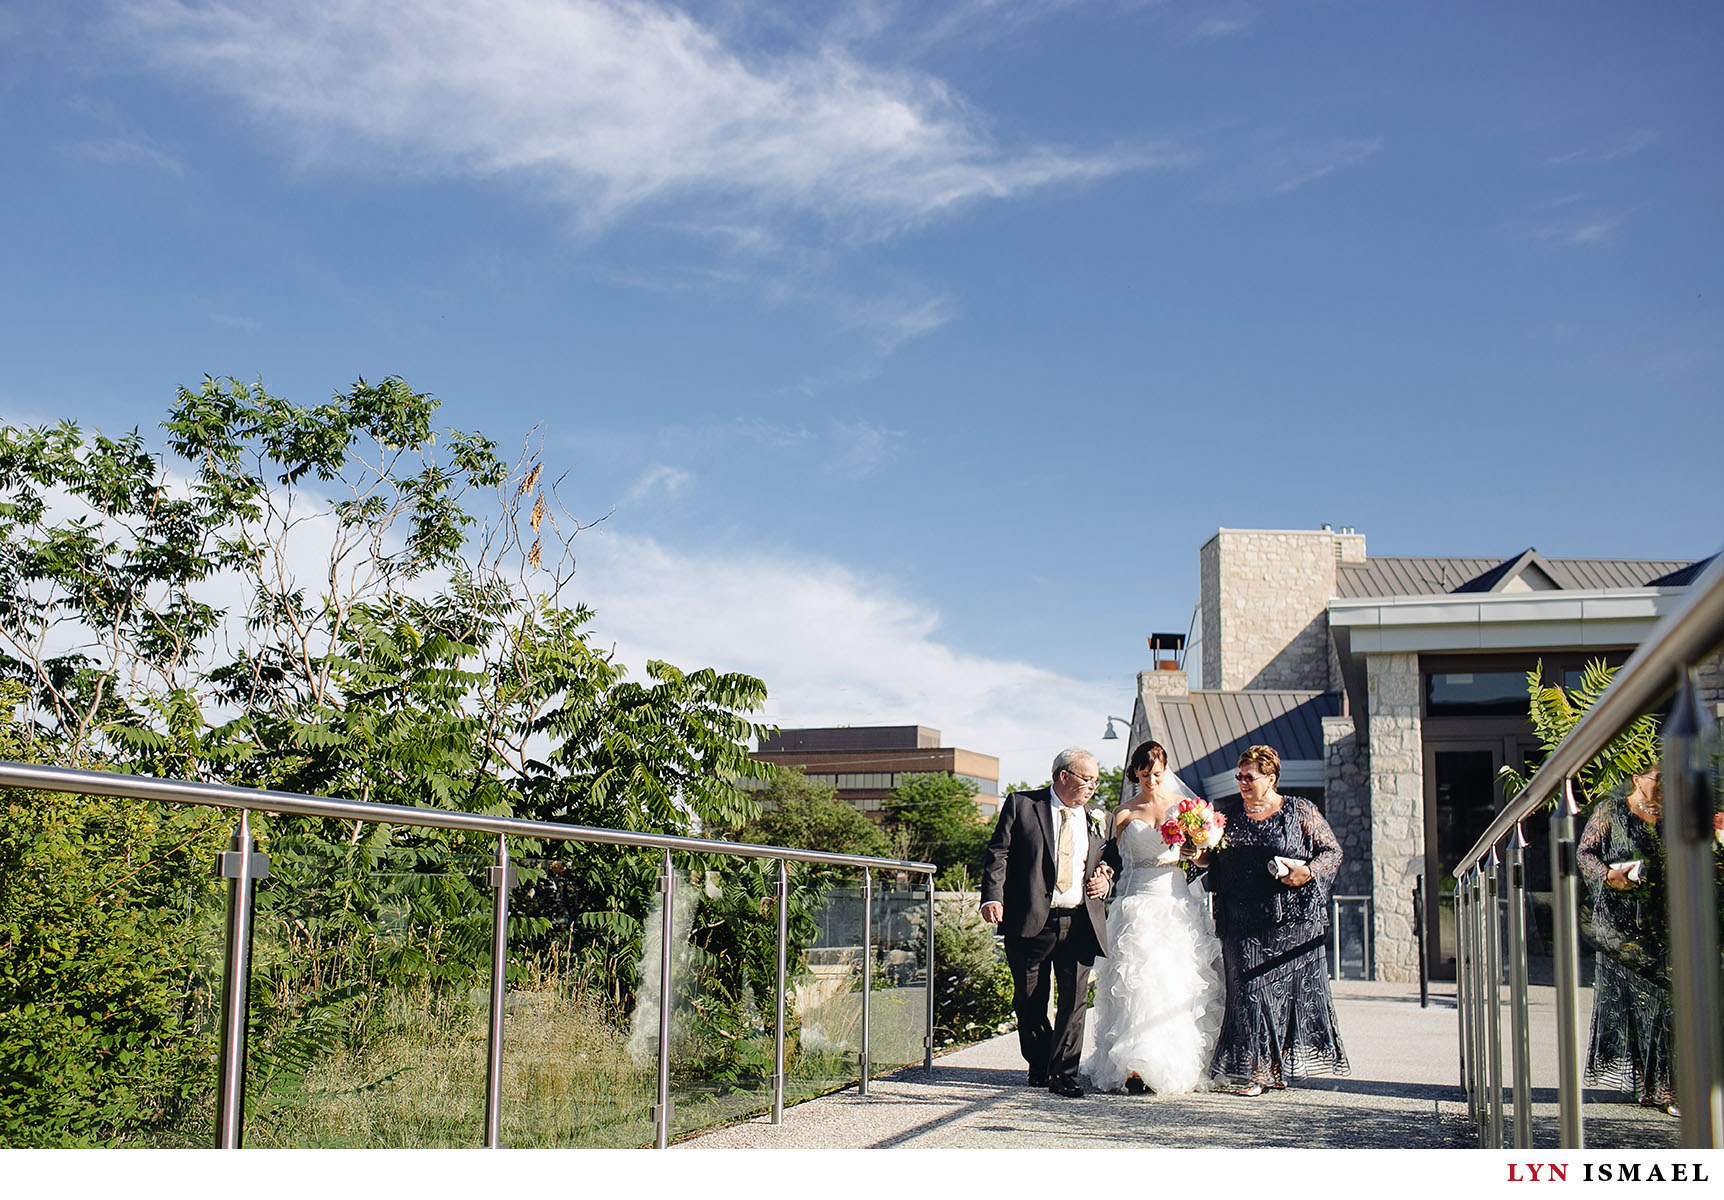 The bride walks down the aisle with her parents at Cambridge Mill.